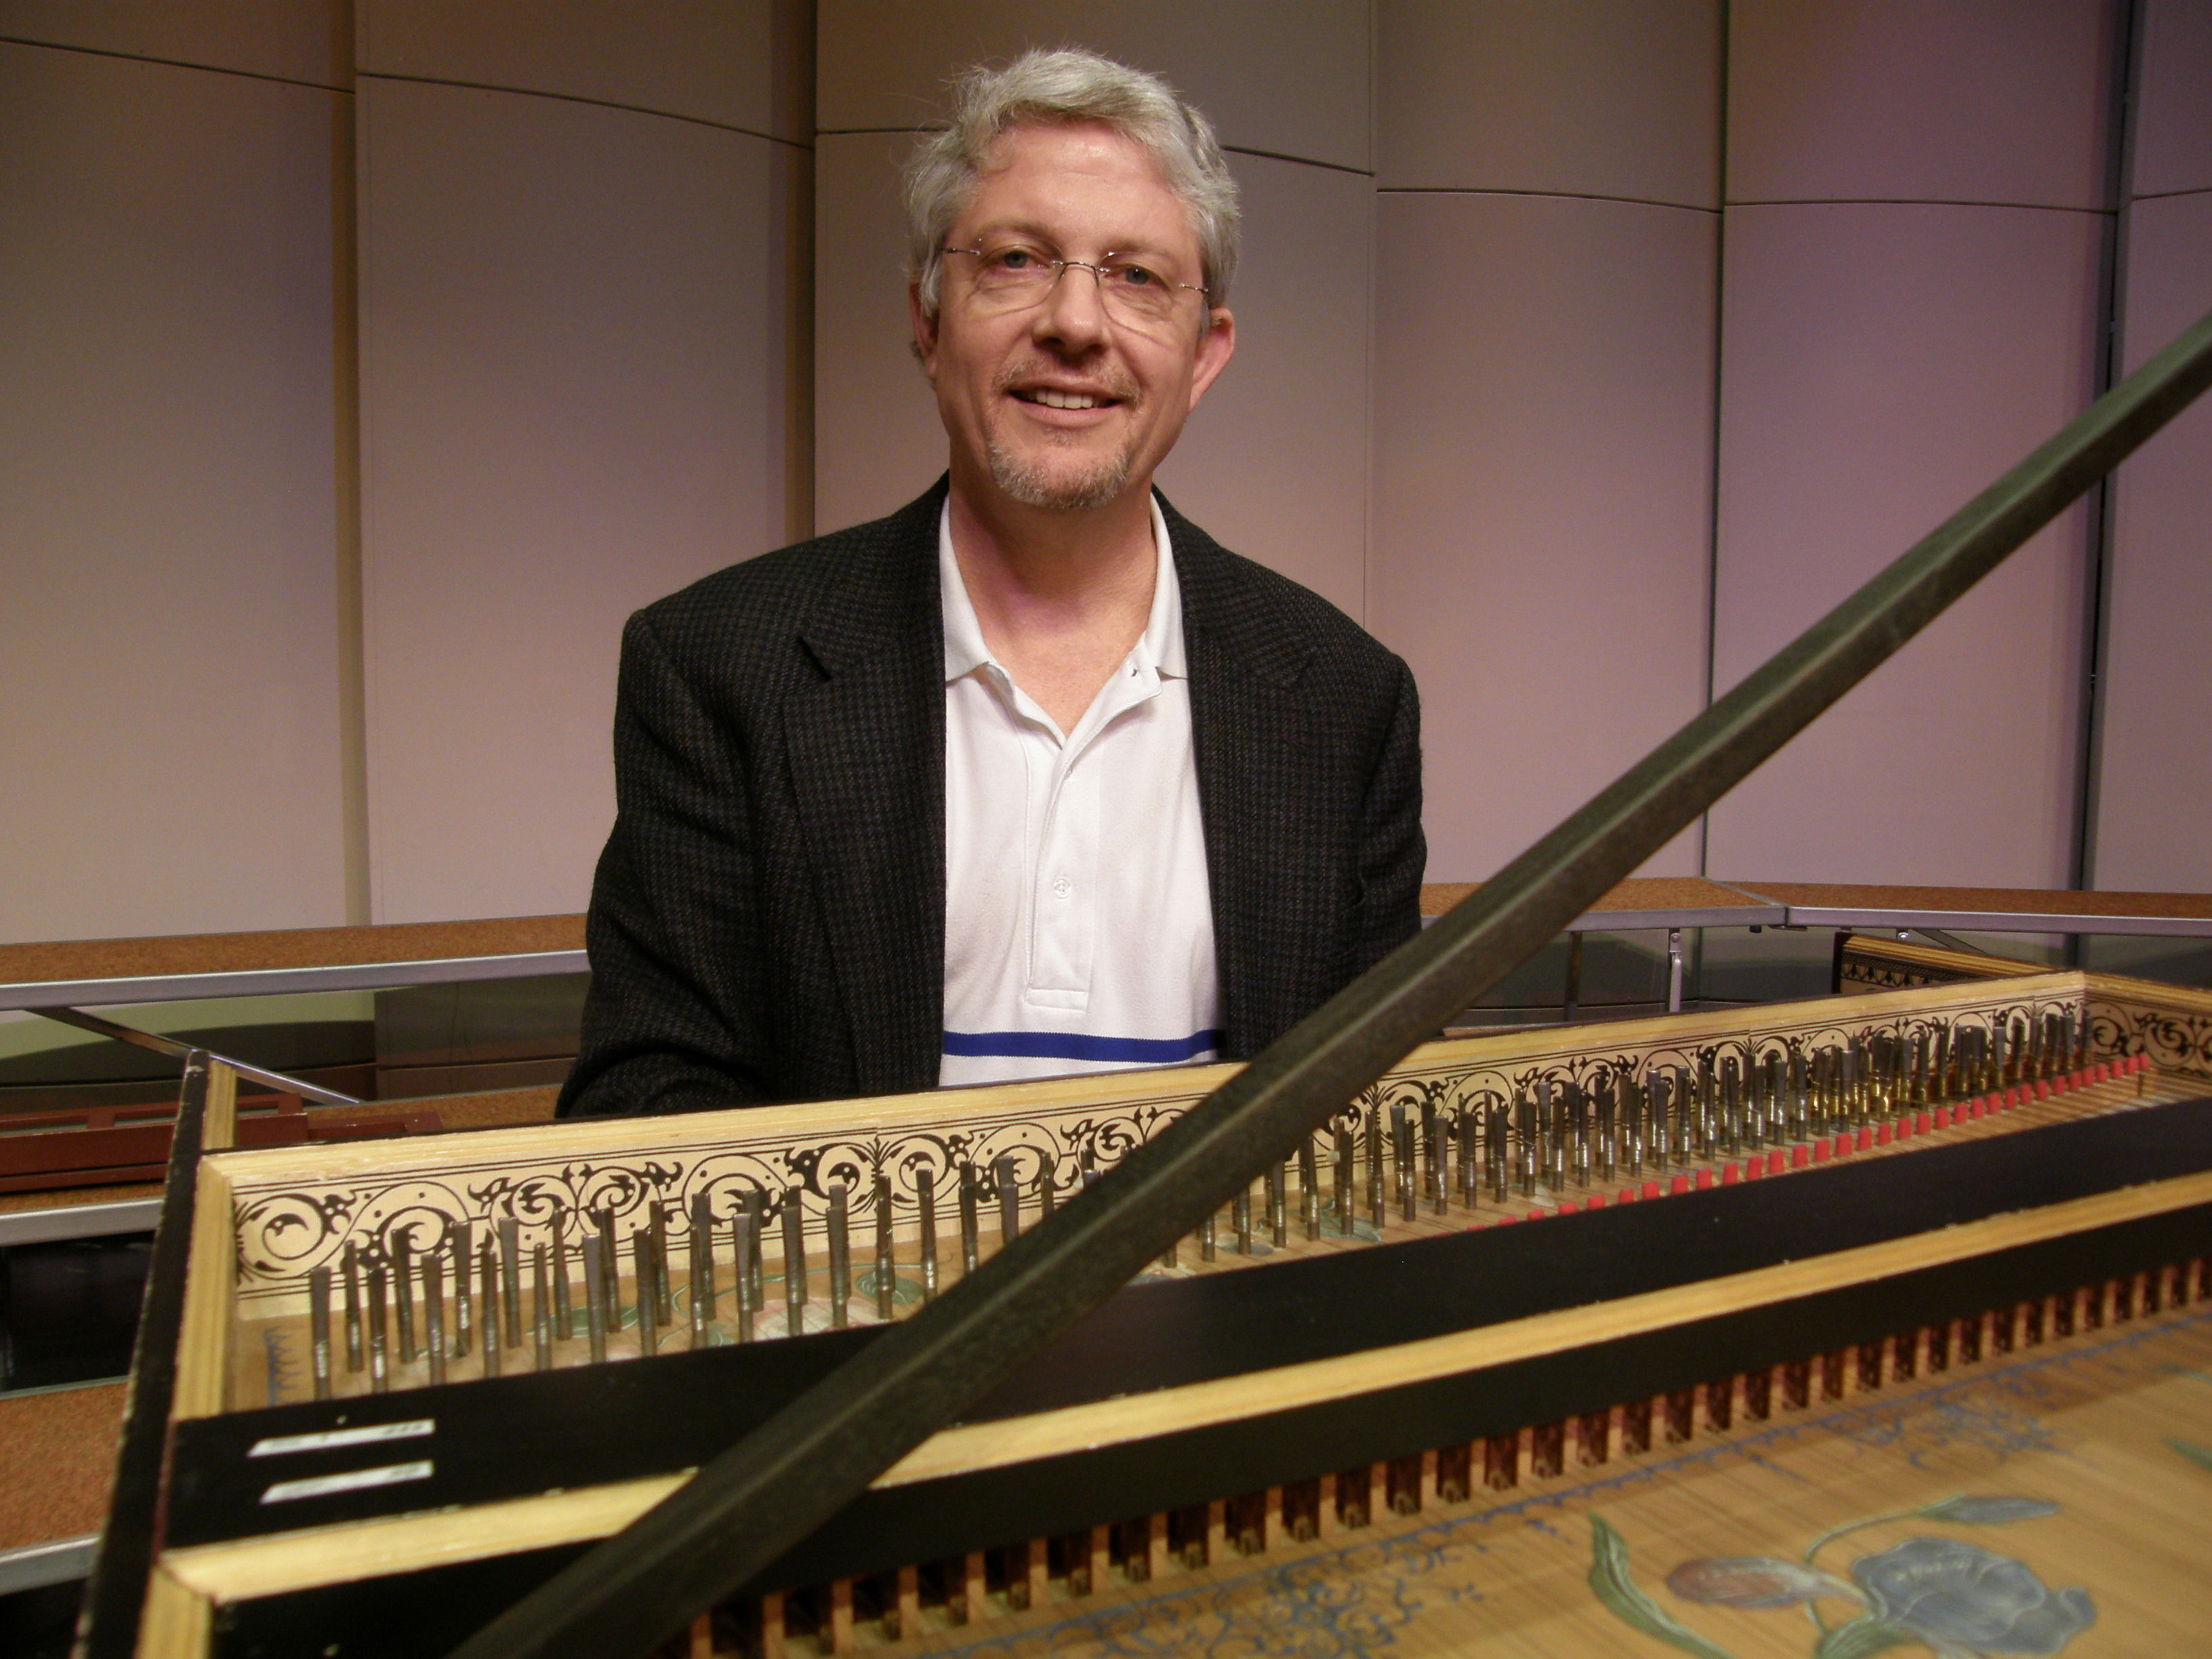 Richard Gard is seen smiling for a photo, sitting in front of a harpsichord. 